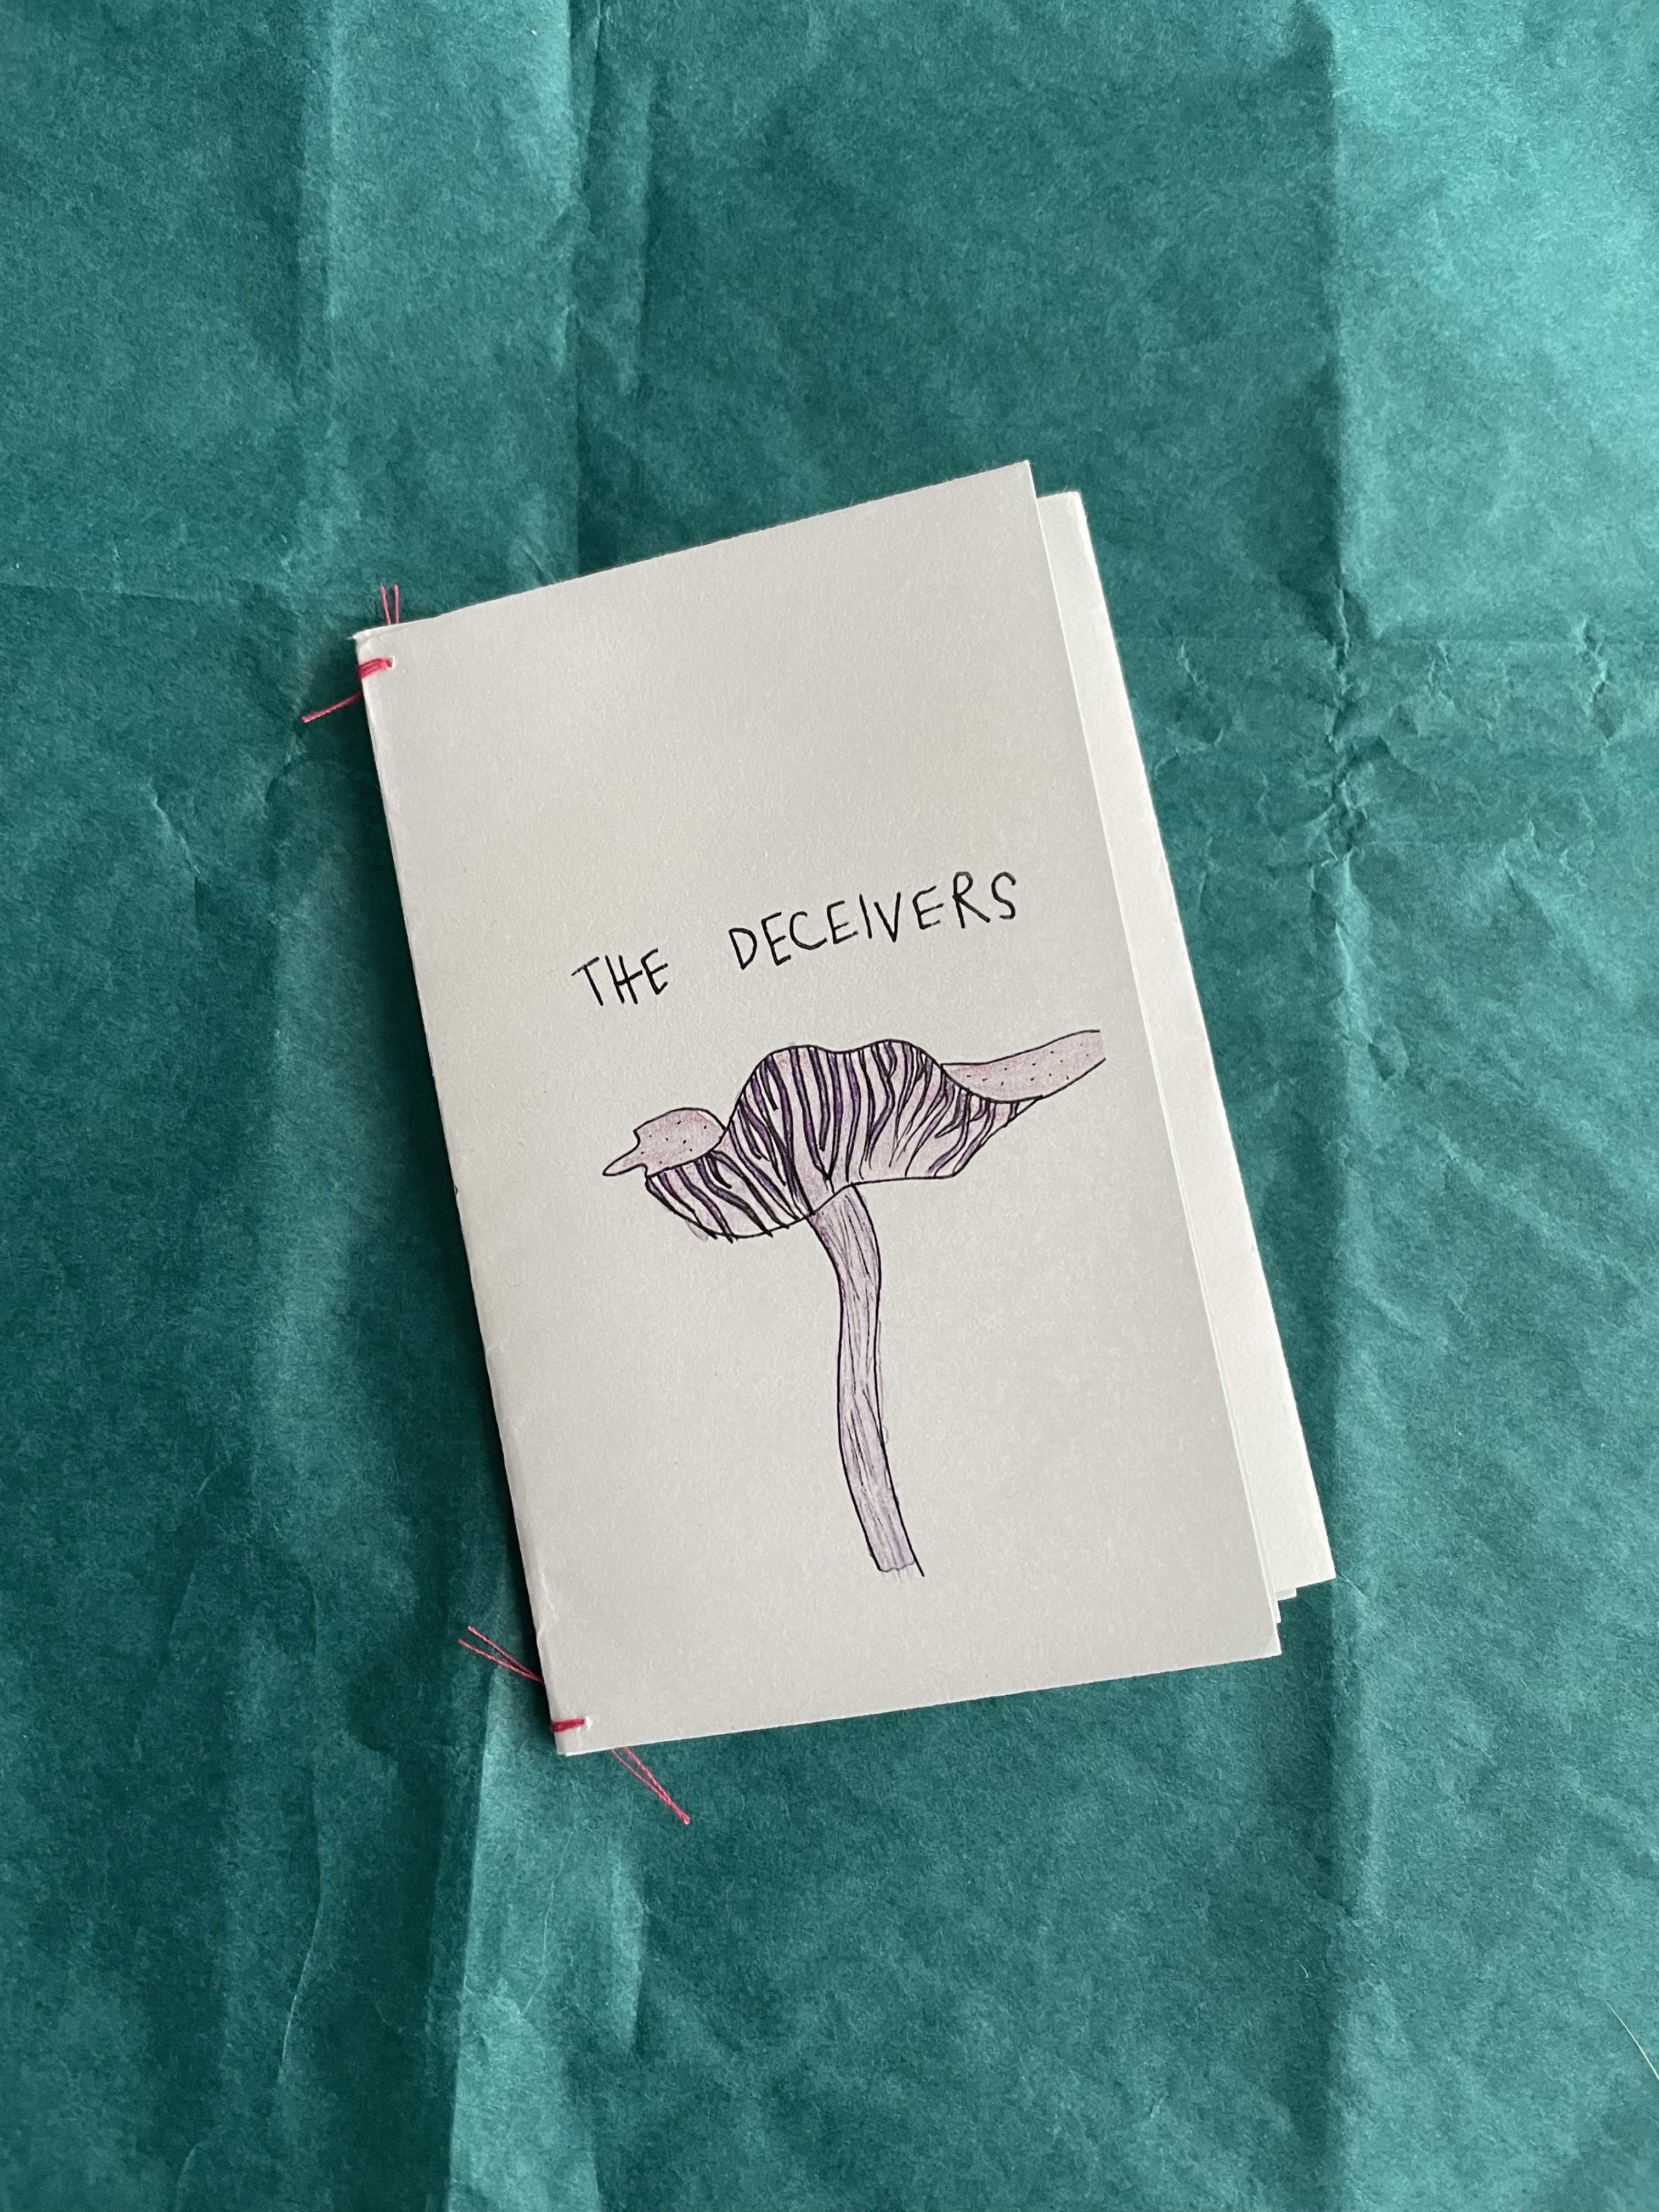 a poetry-comic featuring a watercolor purple mushroom on the cover